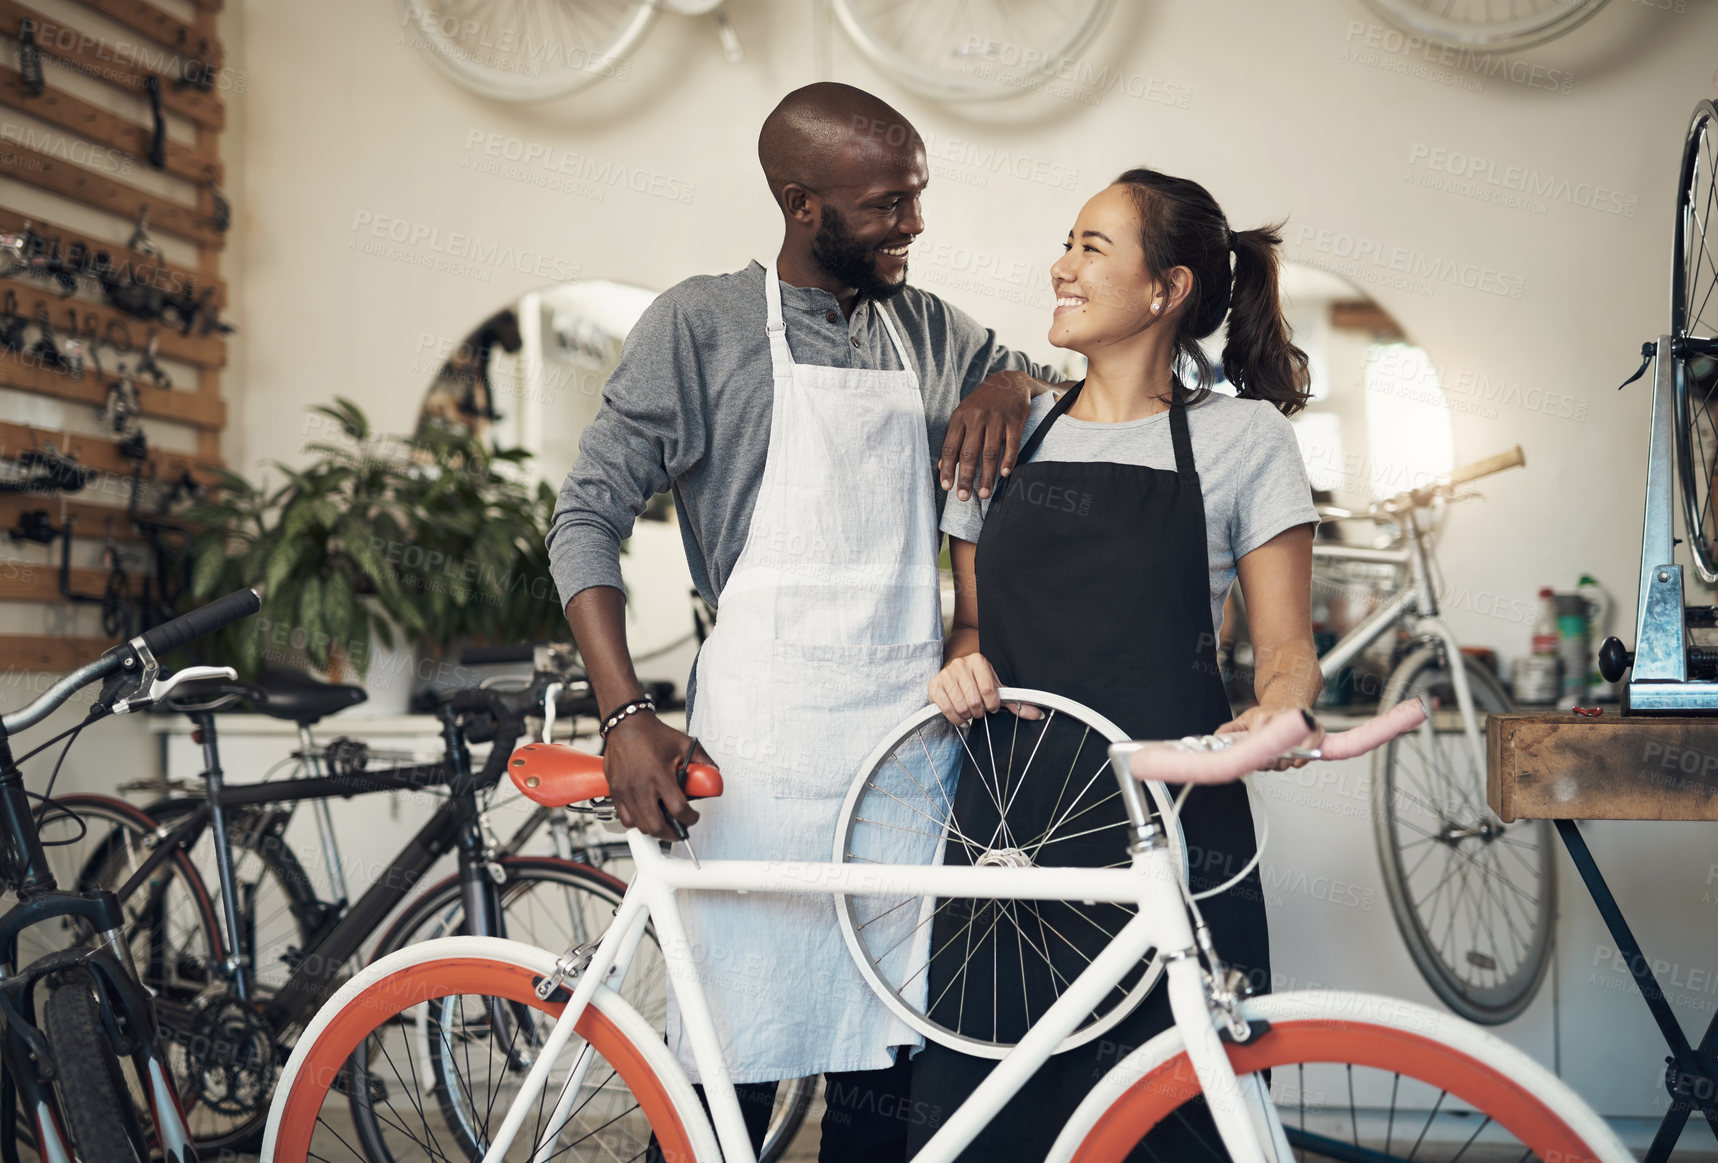 Buy stock photo Shot of two colleagues bonding while holding onto a bicycle wheel at a bicycle repair shop